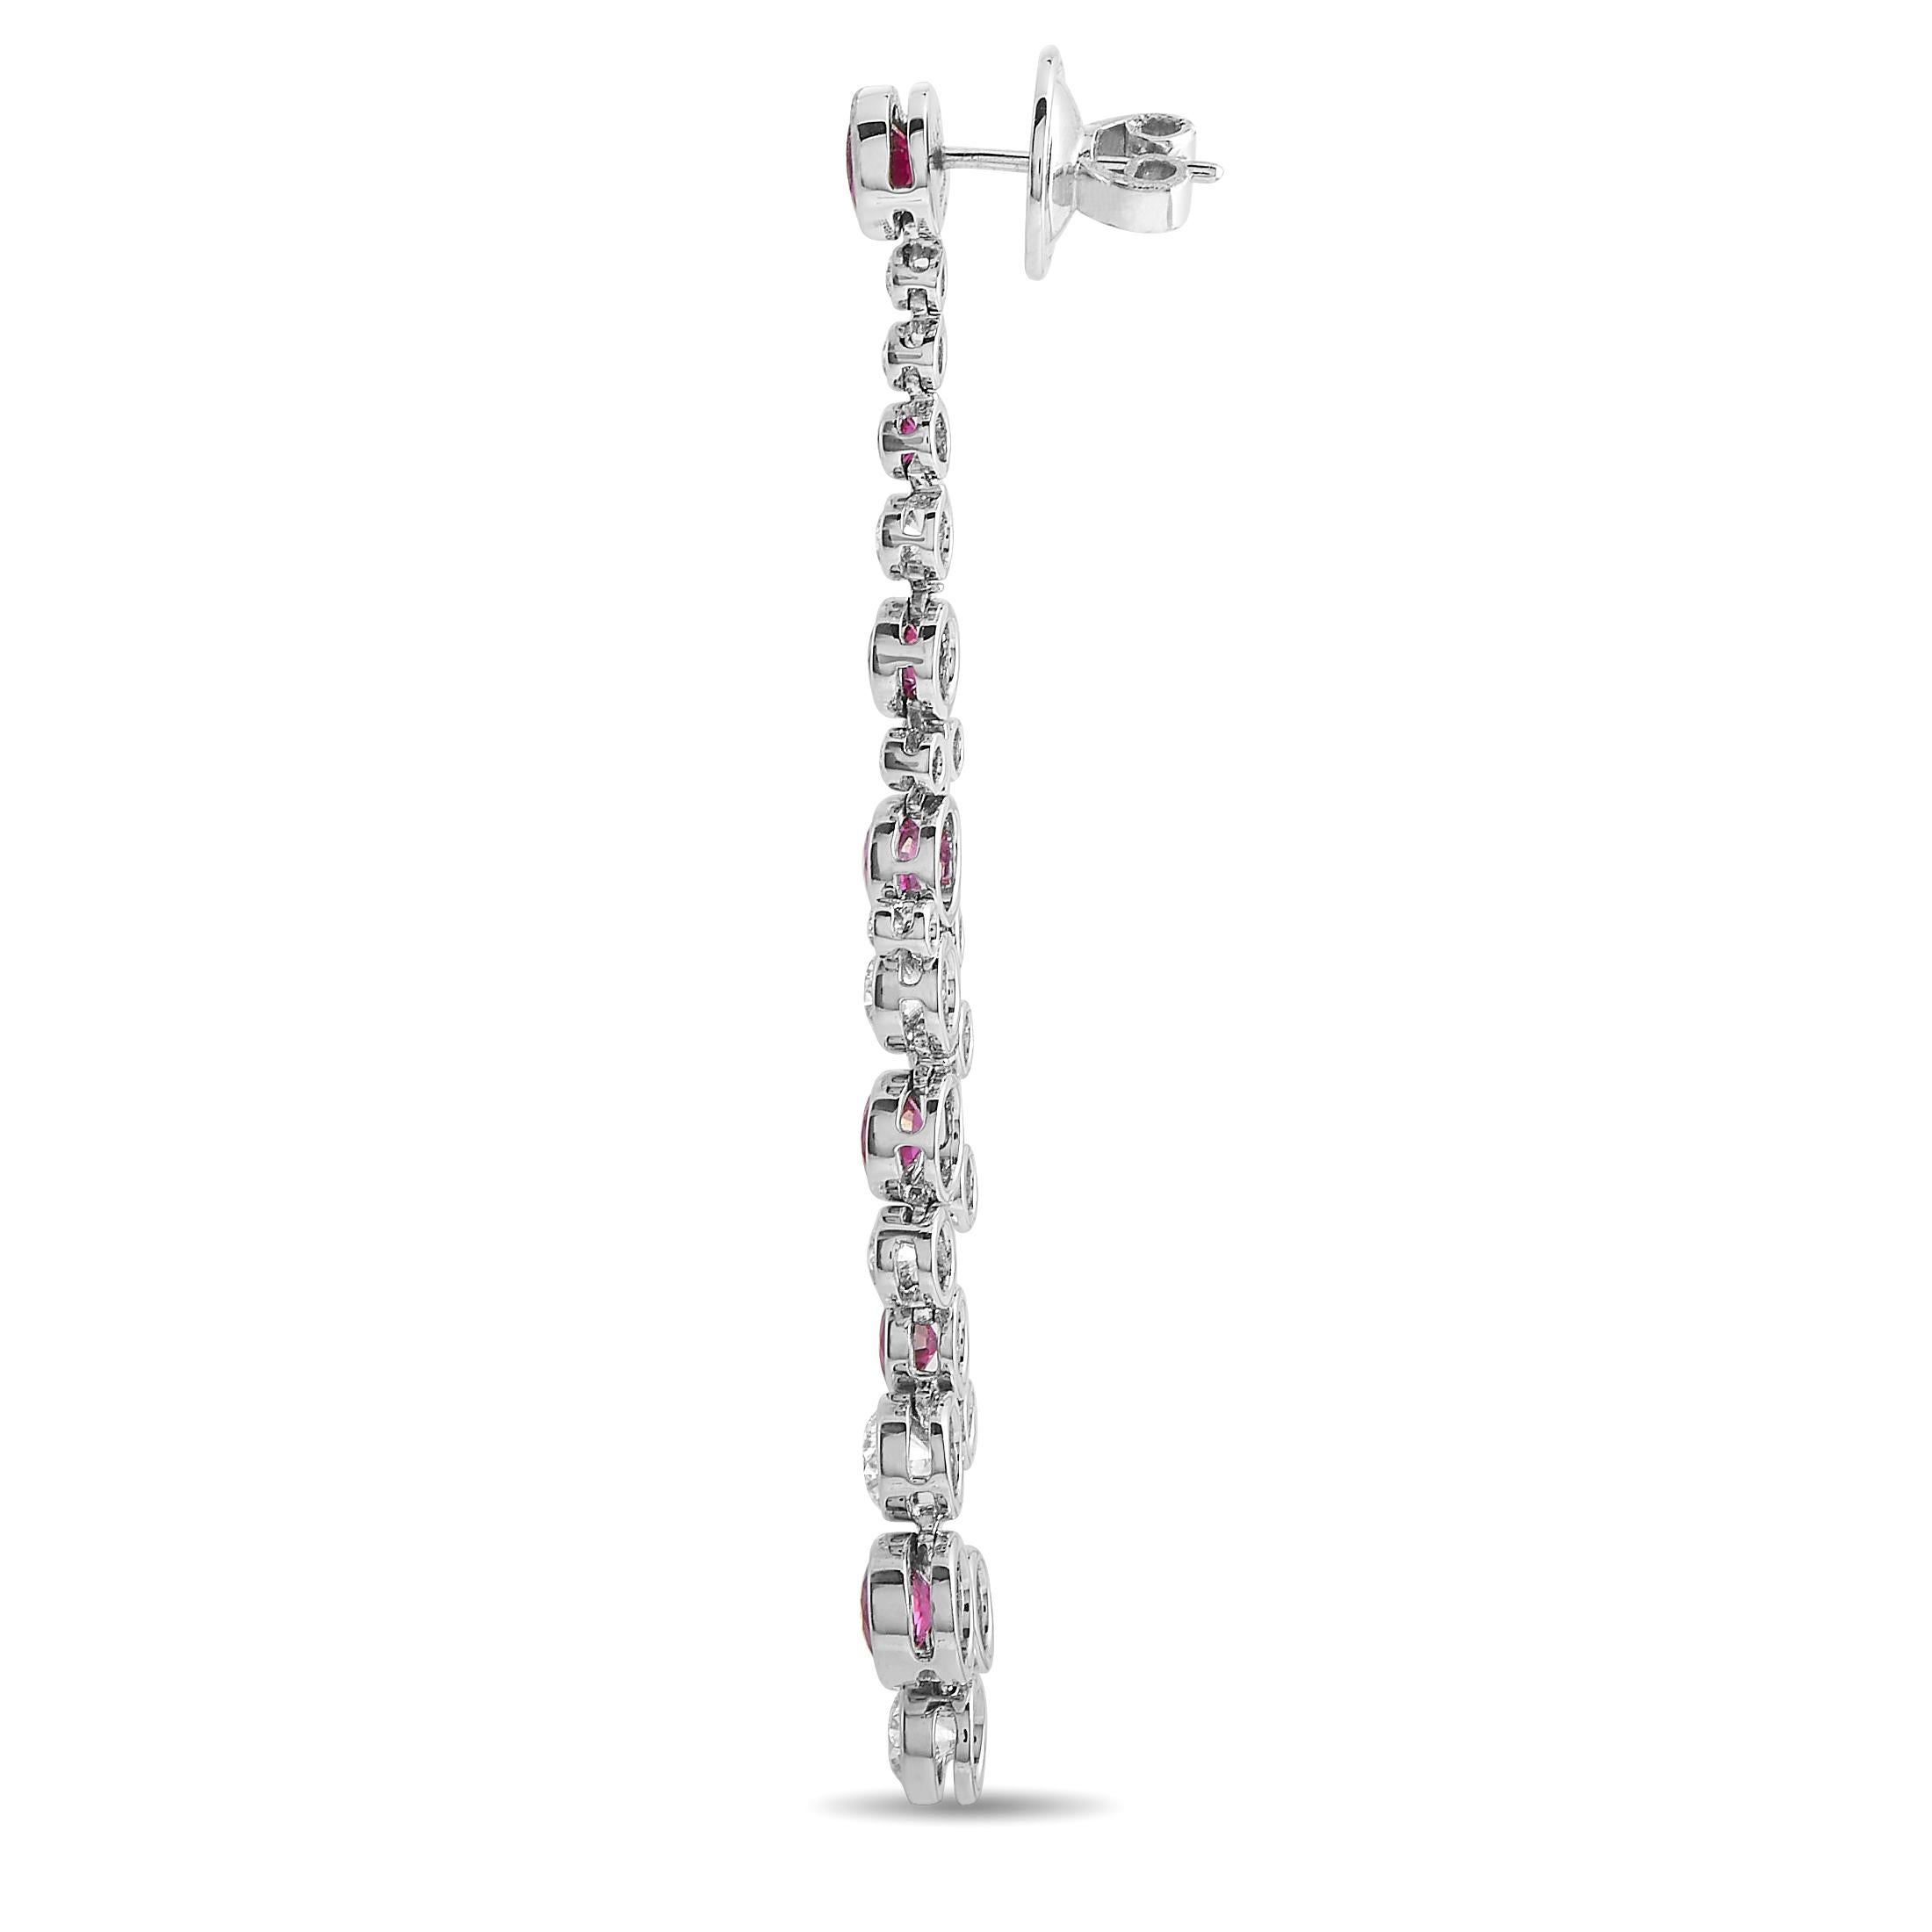 These dramatic drop earrings are simply unforgettable. Glittering diamonds totaling 3.97 carats with E color and VVS1 clarity contrast beautifully against 14 opulent red rubies with a total weight of 5.40 carats. Set within a shimmering, creative